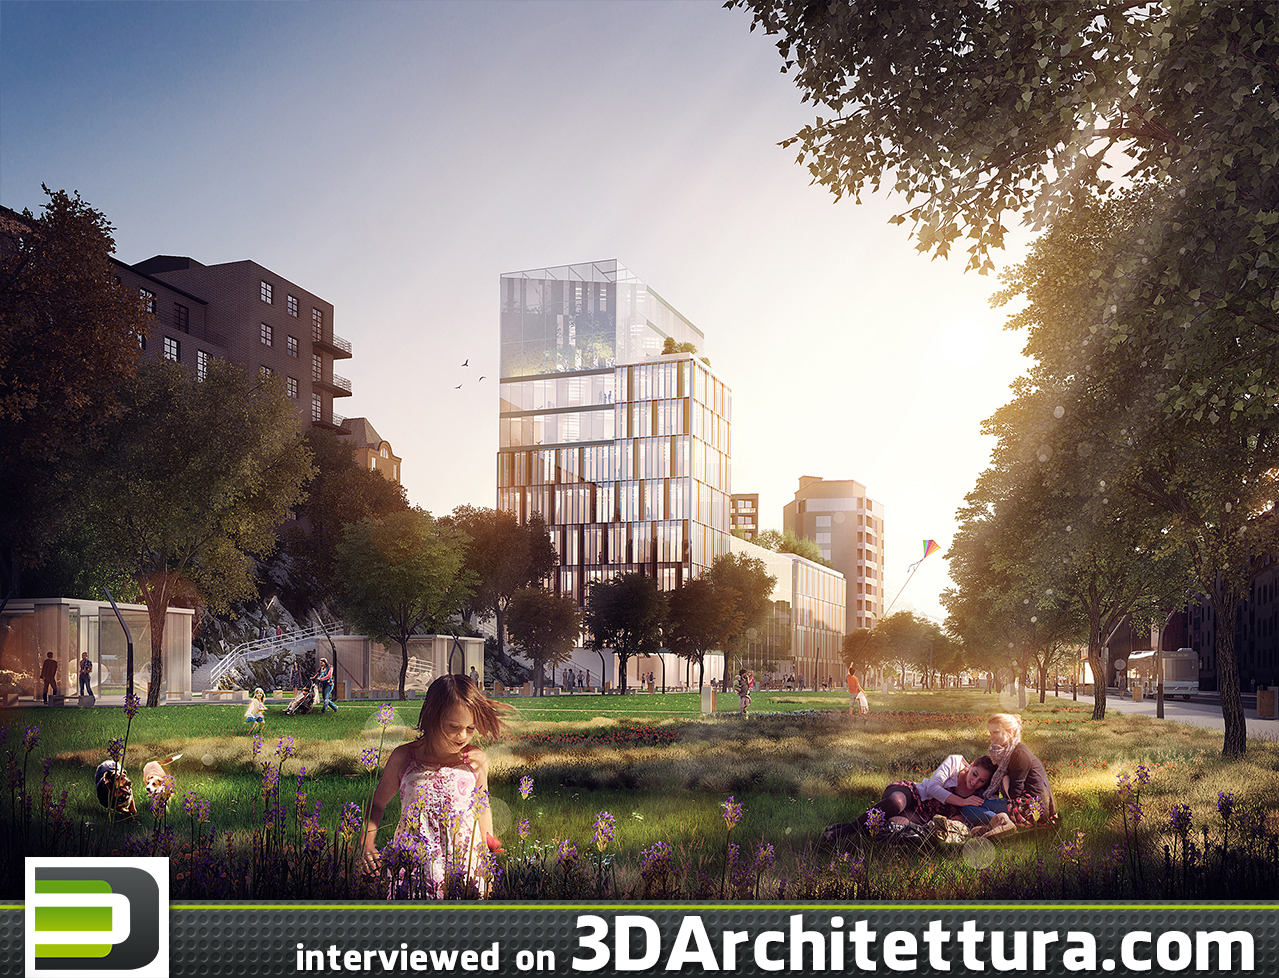 András Káldos , CEO at Brick Visual, Hungary, spoke to 3DArchitettura about artistic architectural visualizations and keeping up with technological progress